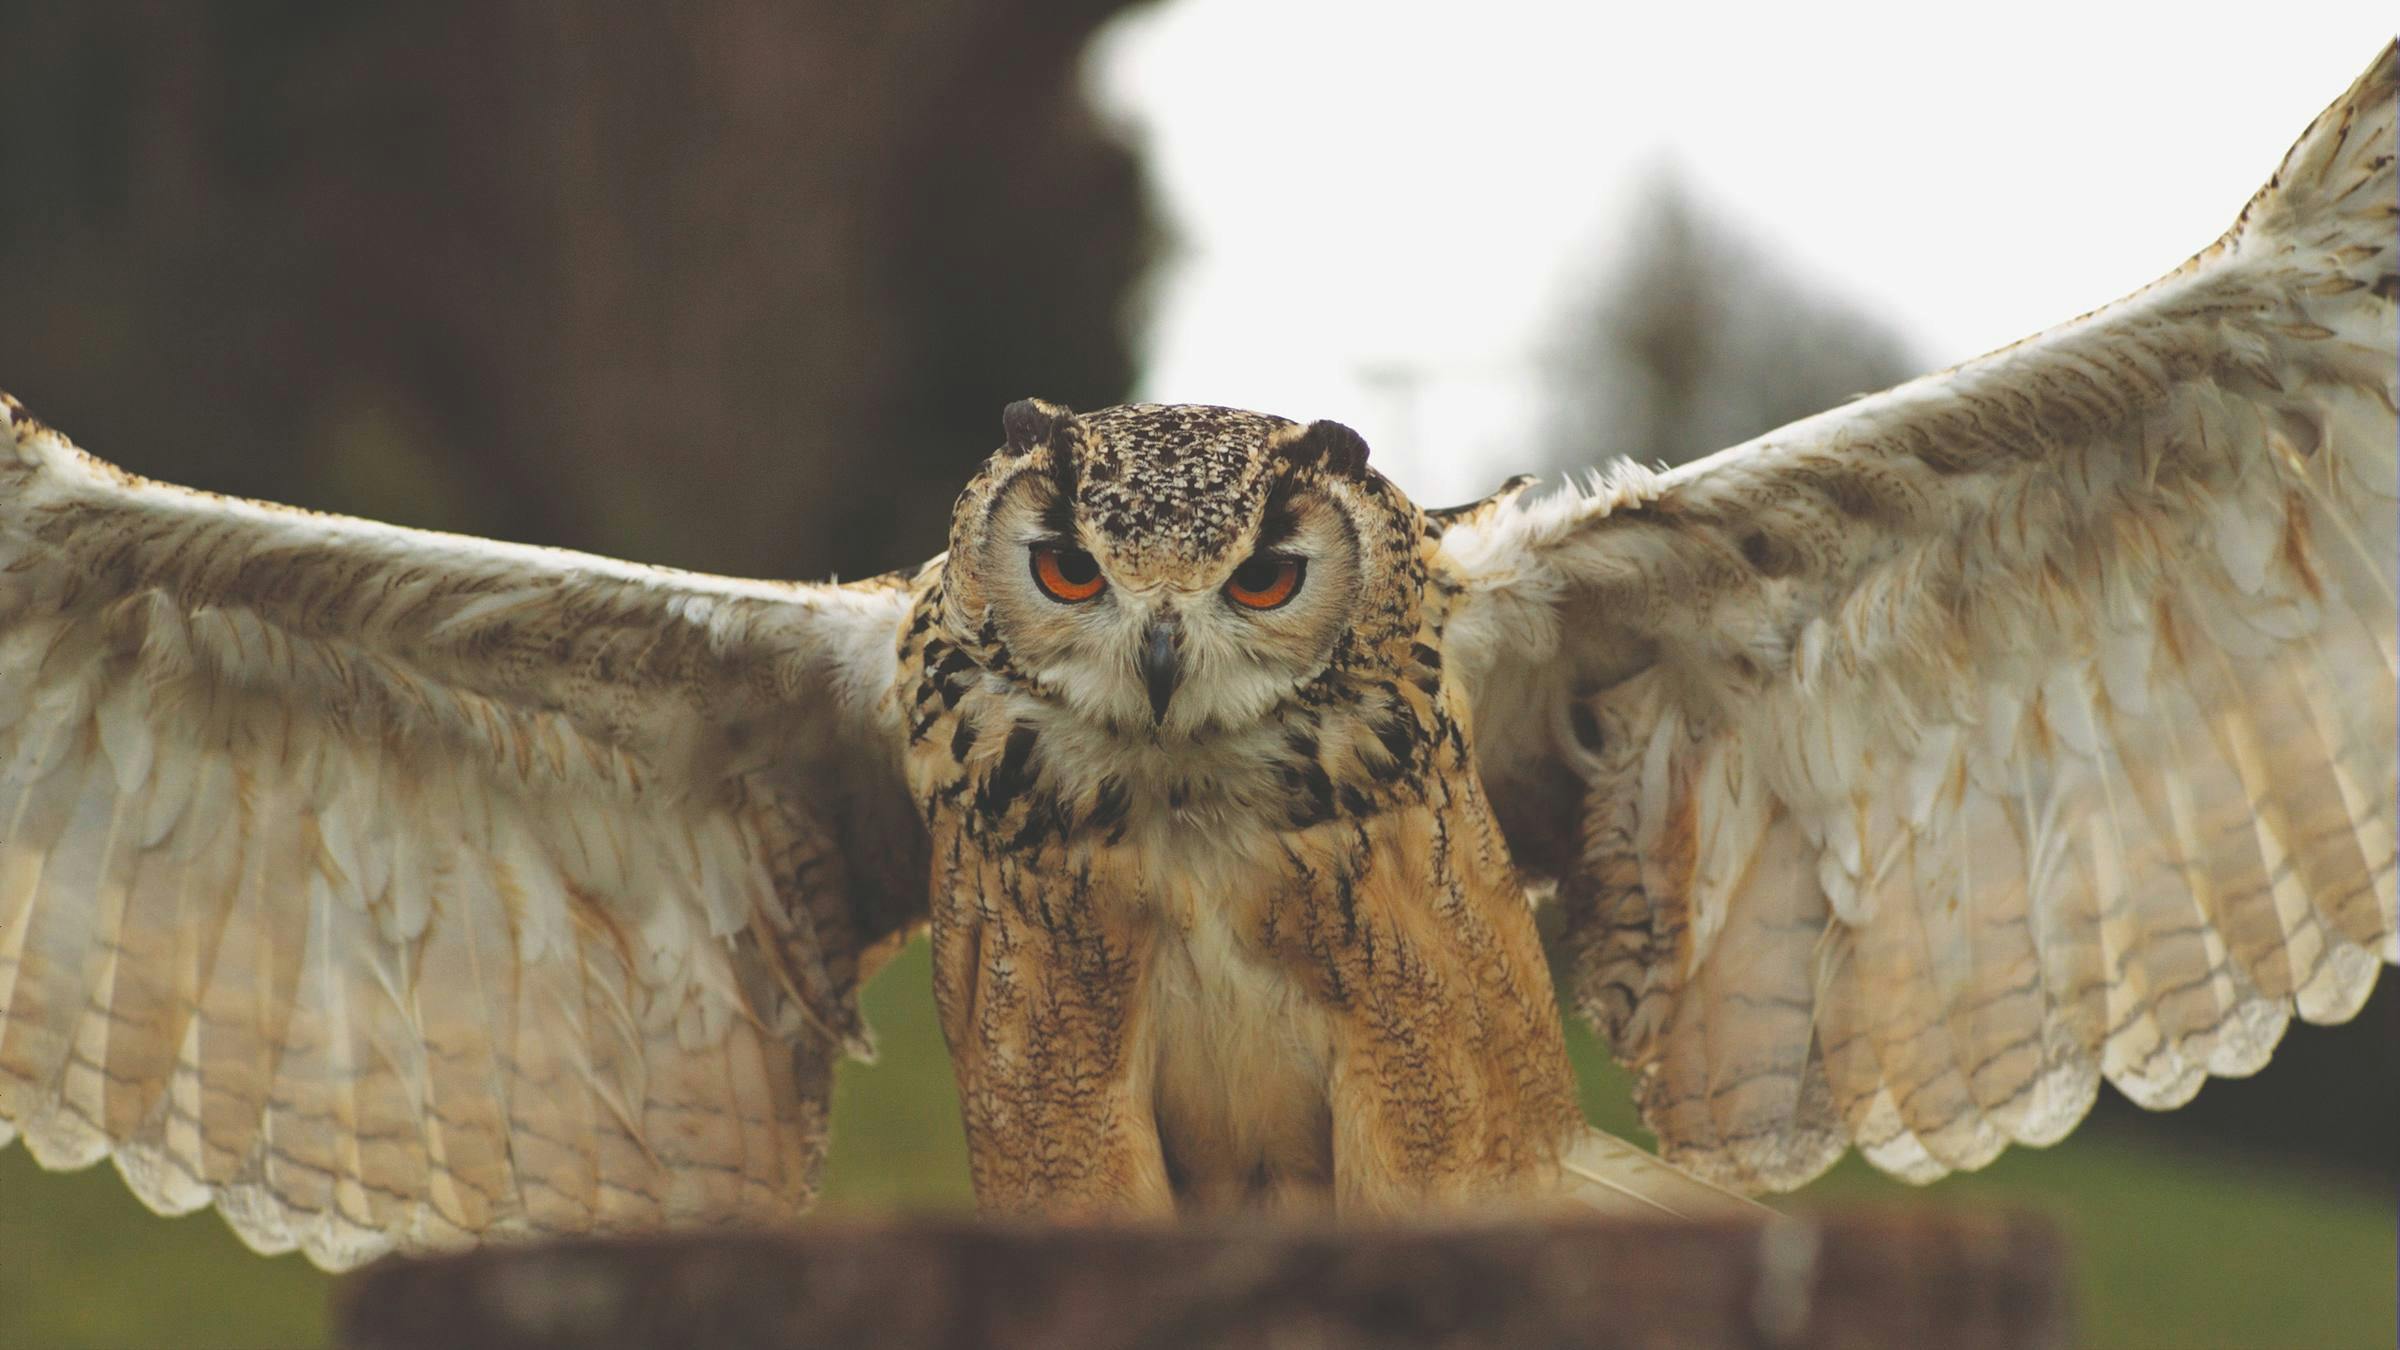 an image of an owl with its wings spread out wide in anticipation of flight